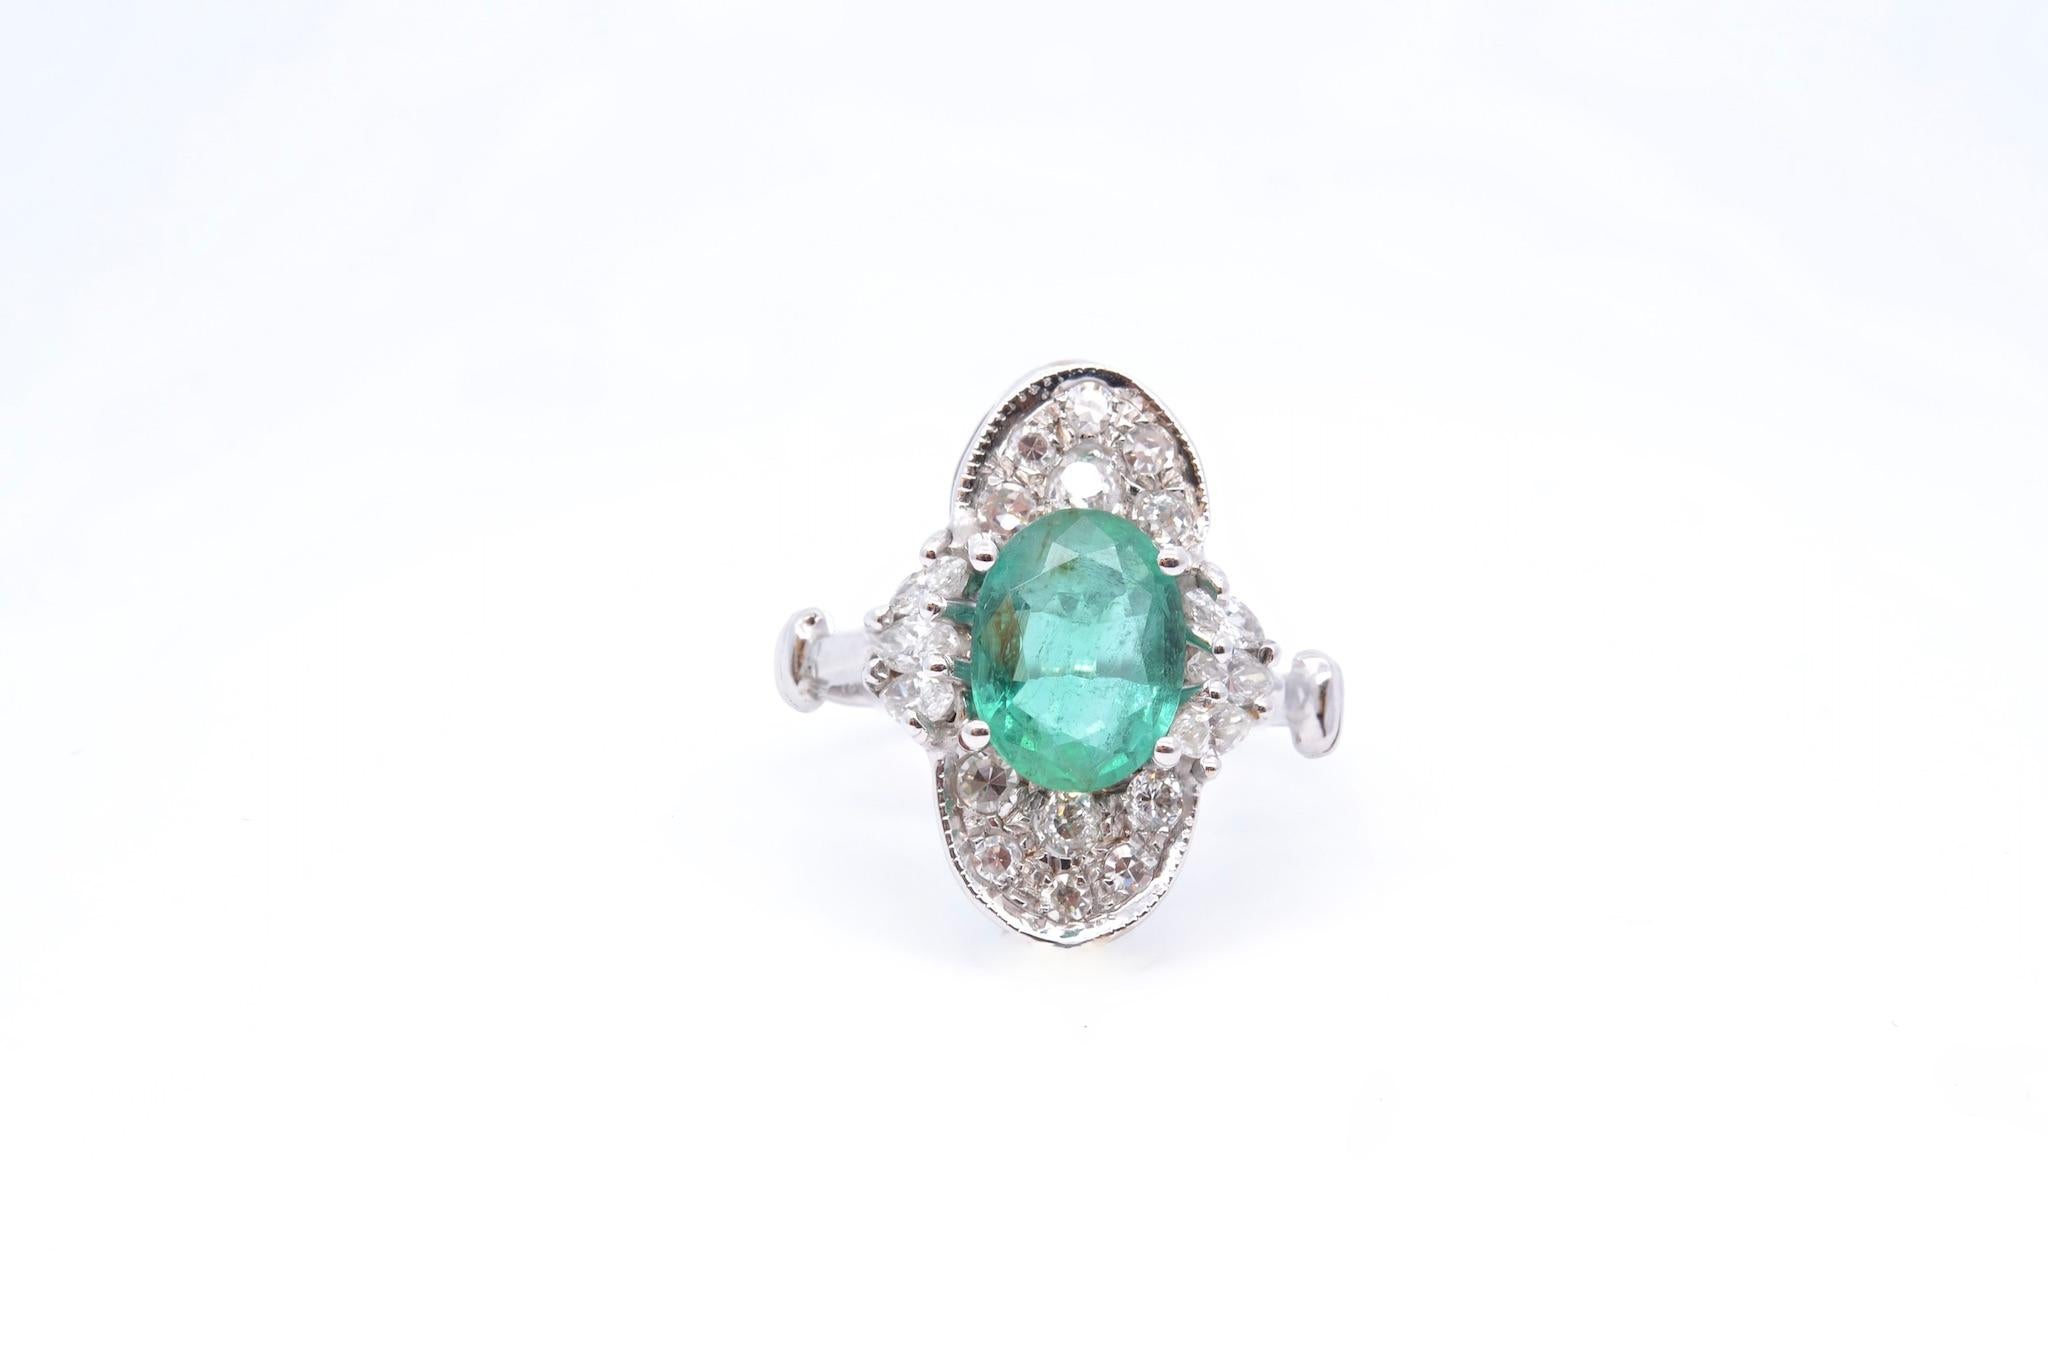 Stones: 1 oval emerald of 2 carats, 6 shuttle diamonds: 0.40 carat, 12 round diamonds: 0.60 carat
Material: 18k gold
Dimensions: 1.9cm x 1.3cm
Weight: 3.3g
Period: 1960
Size: 51 and a half (free sizing)
Certificate
Ref. : 25105